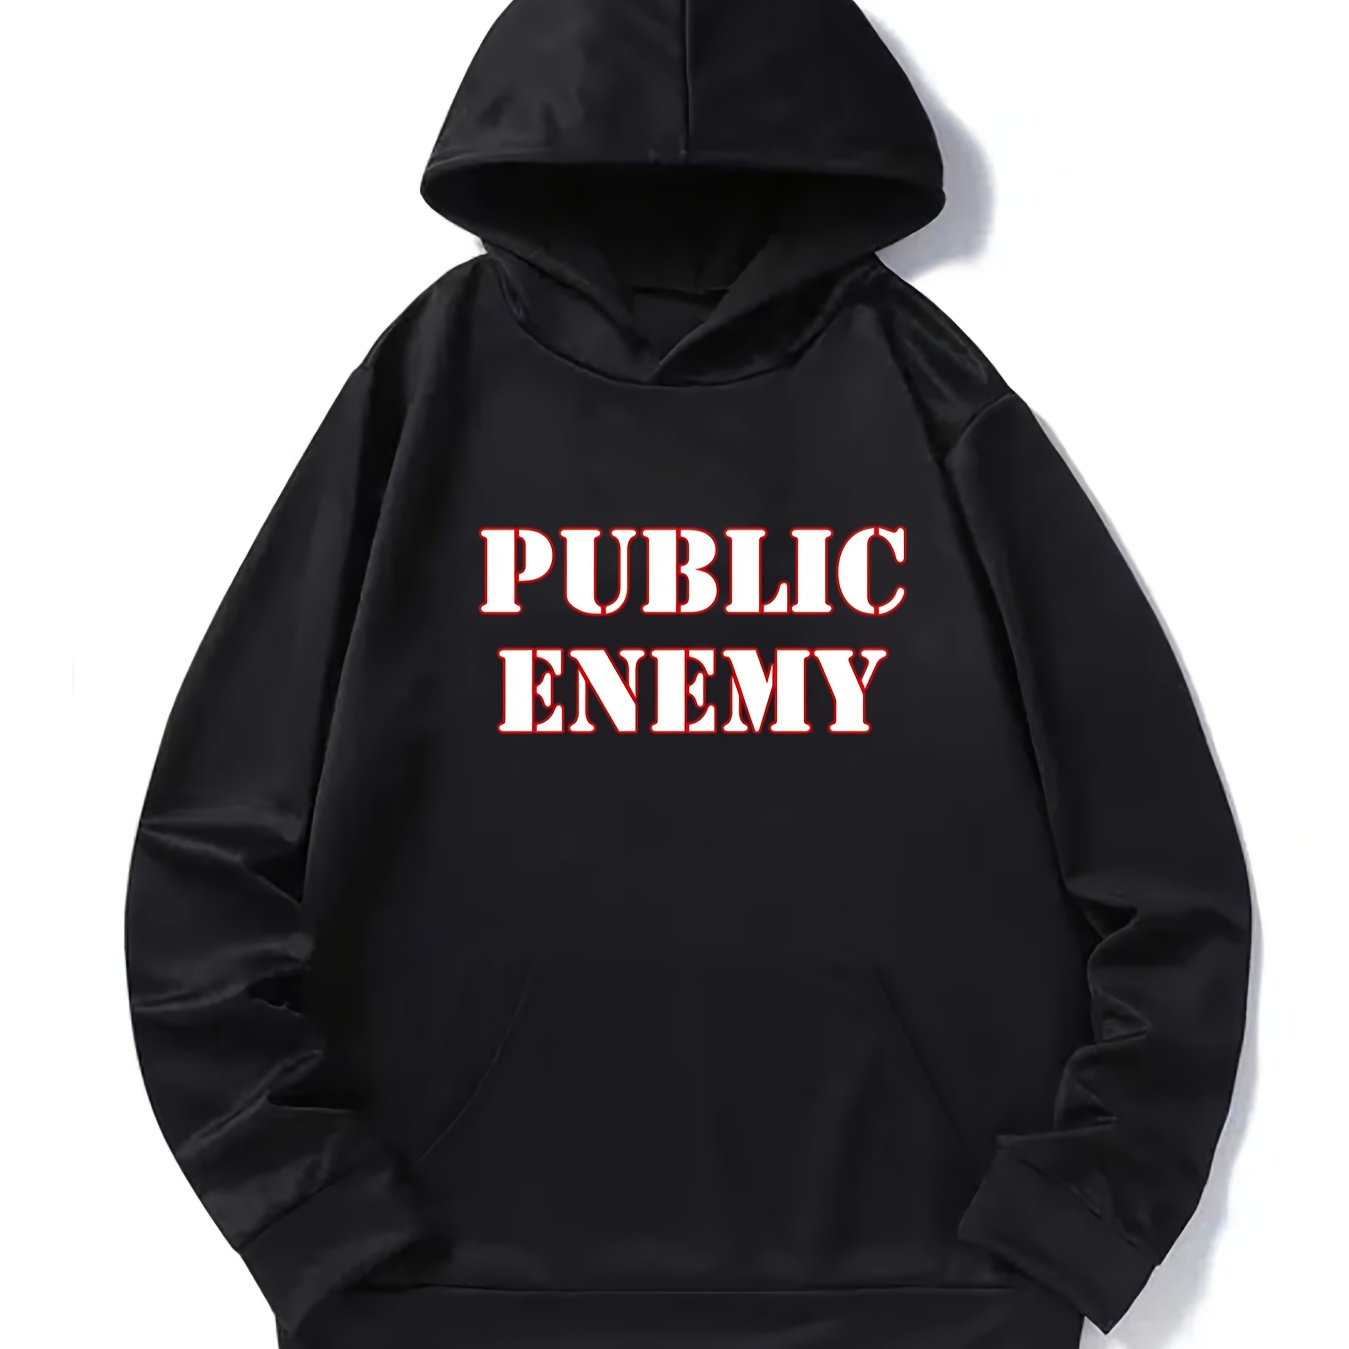 

Public Enemy Print Men's Pullover Round Neck Hoodies With Kangaroo Pocket & Long Sleeve Hooded Sweatshirt Loose Casual Top For Autumn Winter Men's Clothing As Gifts